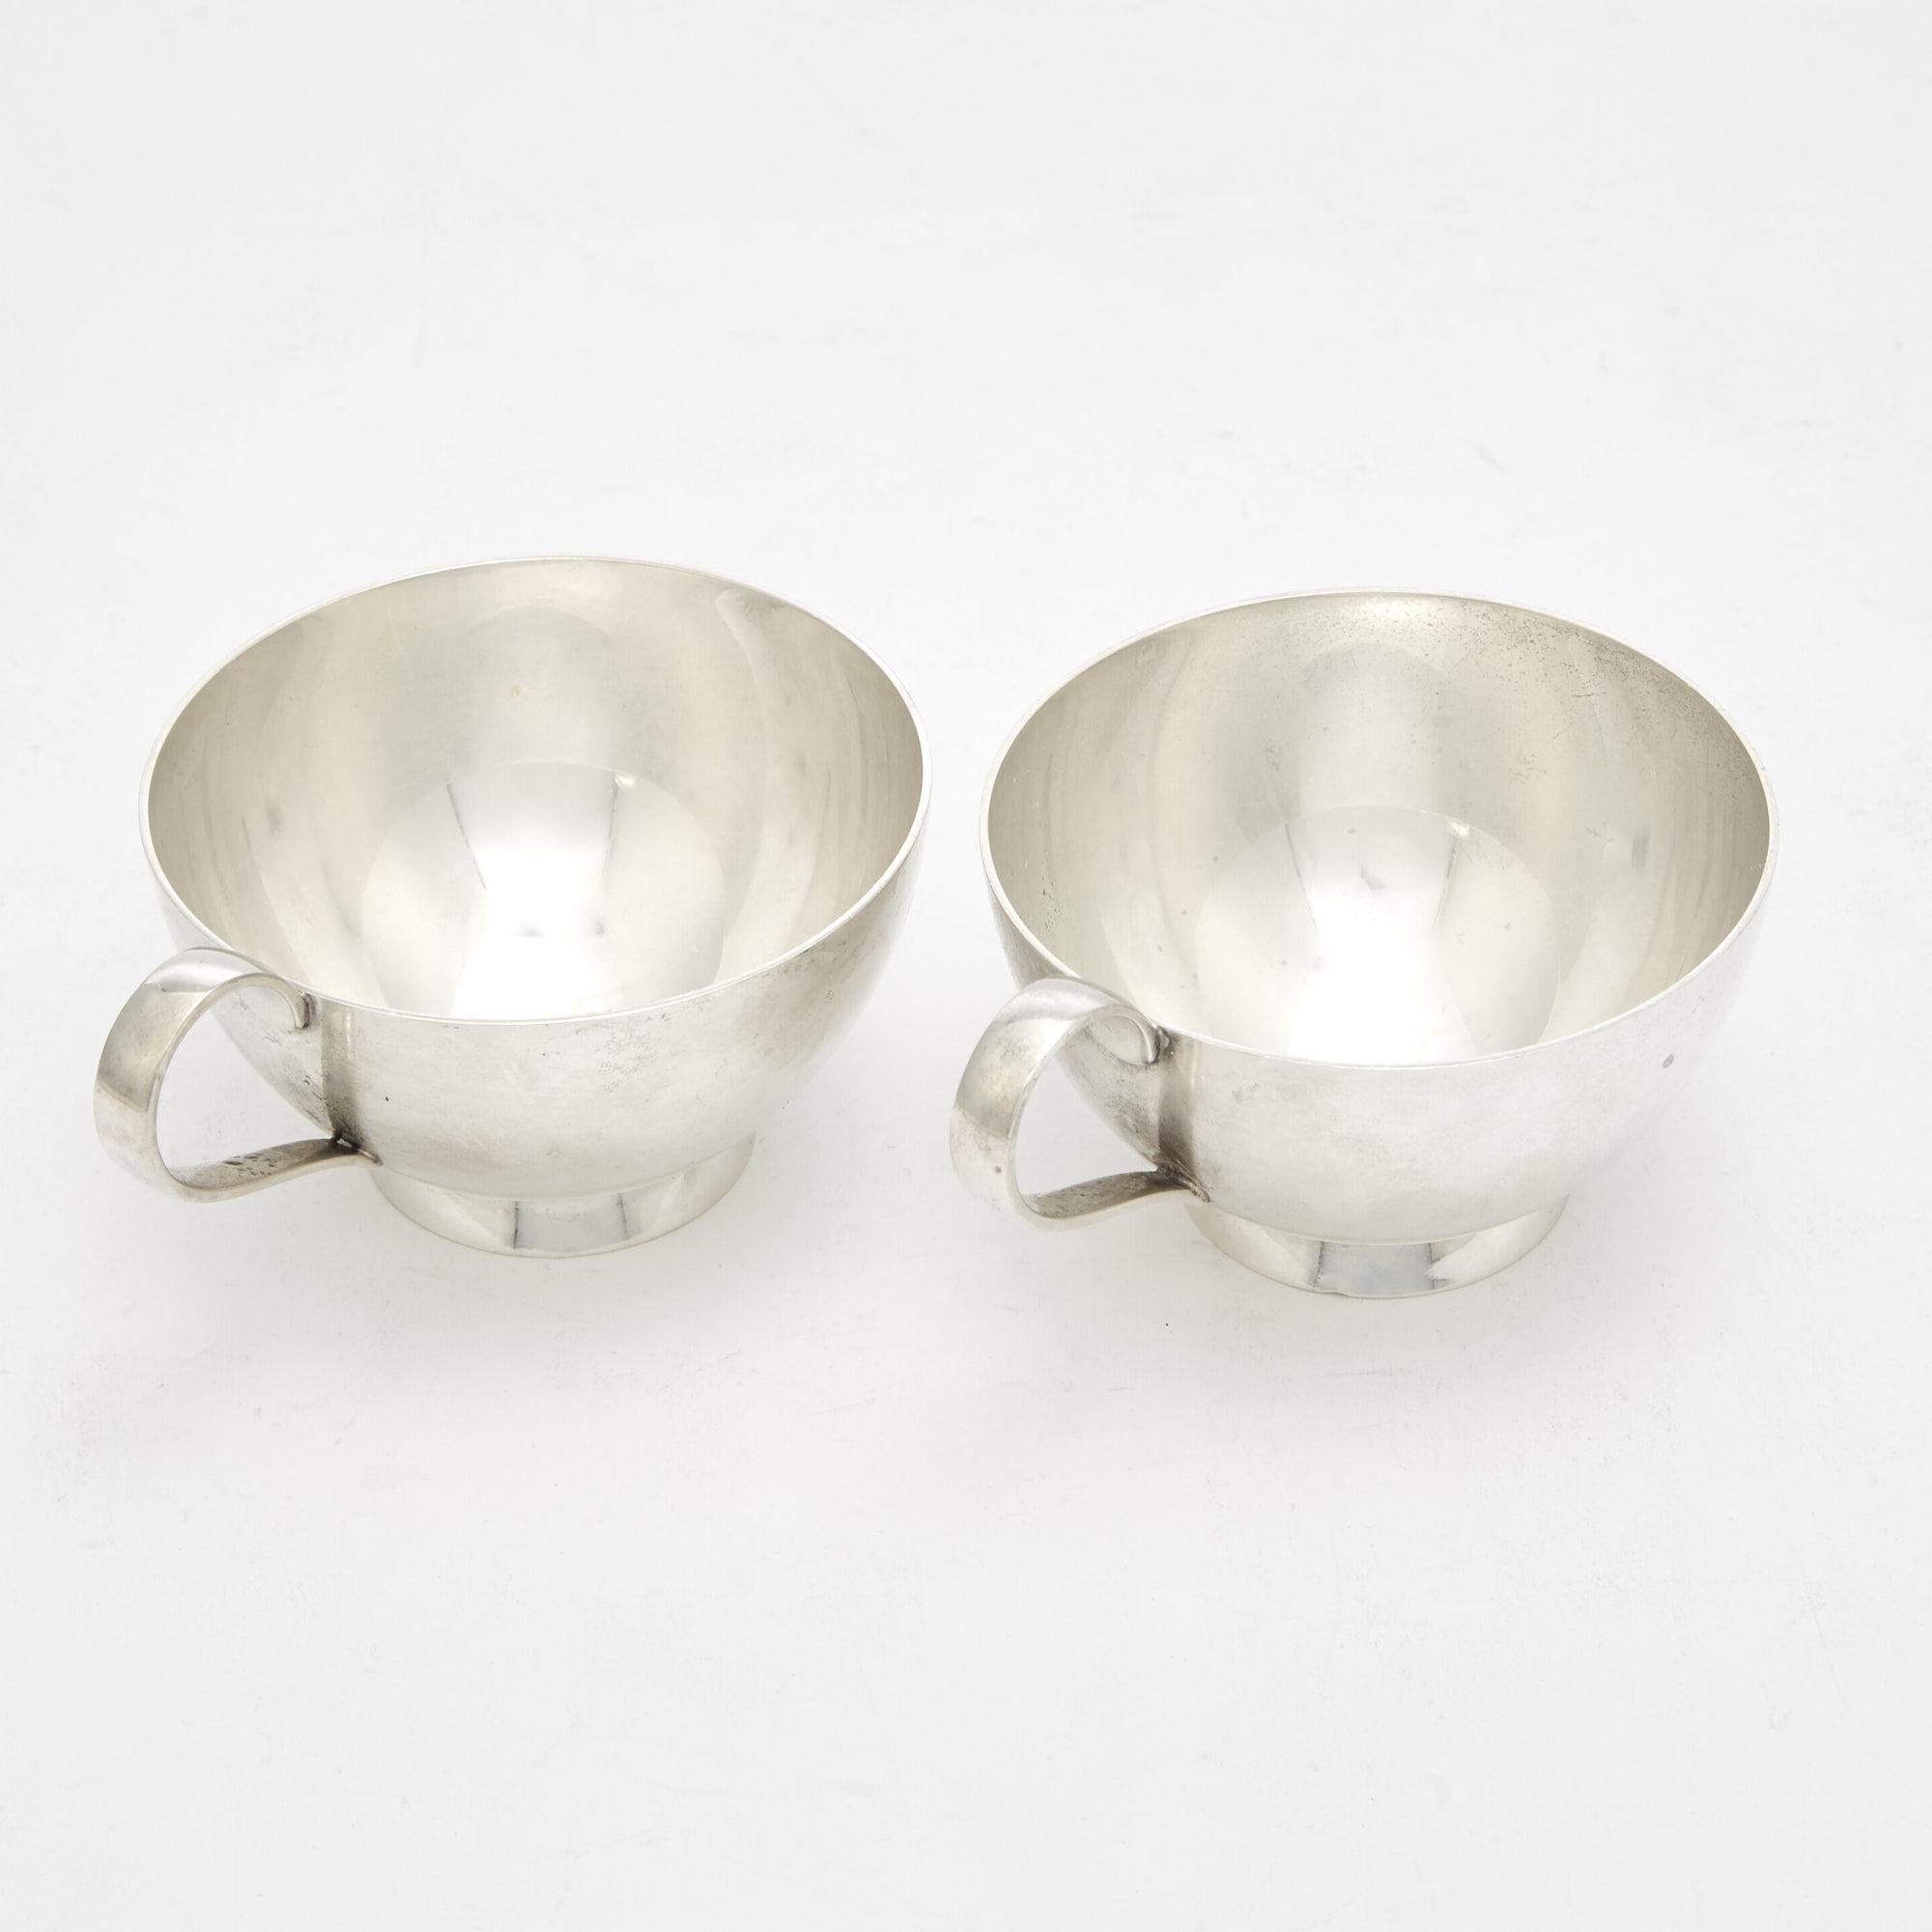 Immerse yourself in the epitome of Art Deco sophistication with our Tiffany & Co Sterling Silver Barware/Tableware Punch Cup Serving Service for Ten People. Crafted by the esteemed Tiffany & Co, this set exudes timeless elegance through its clean